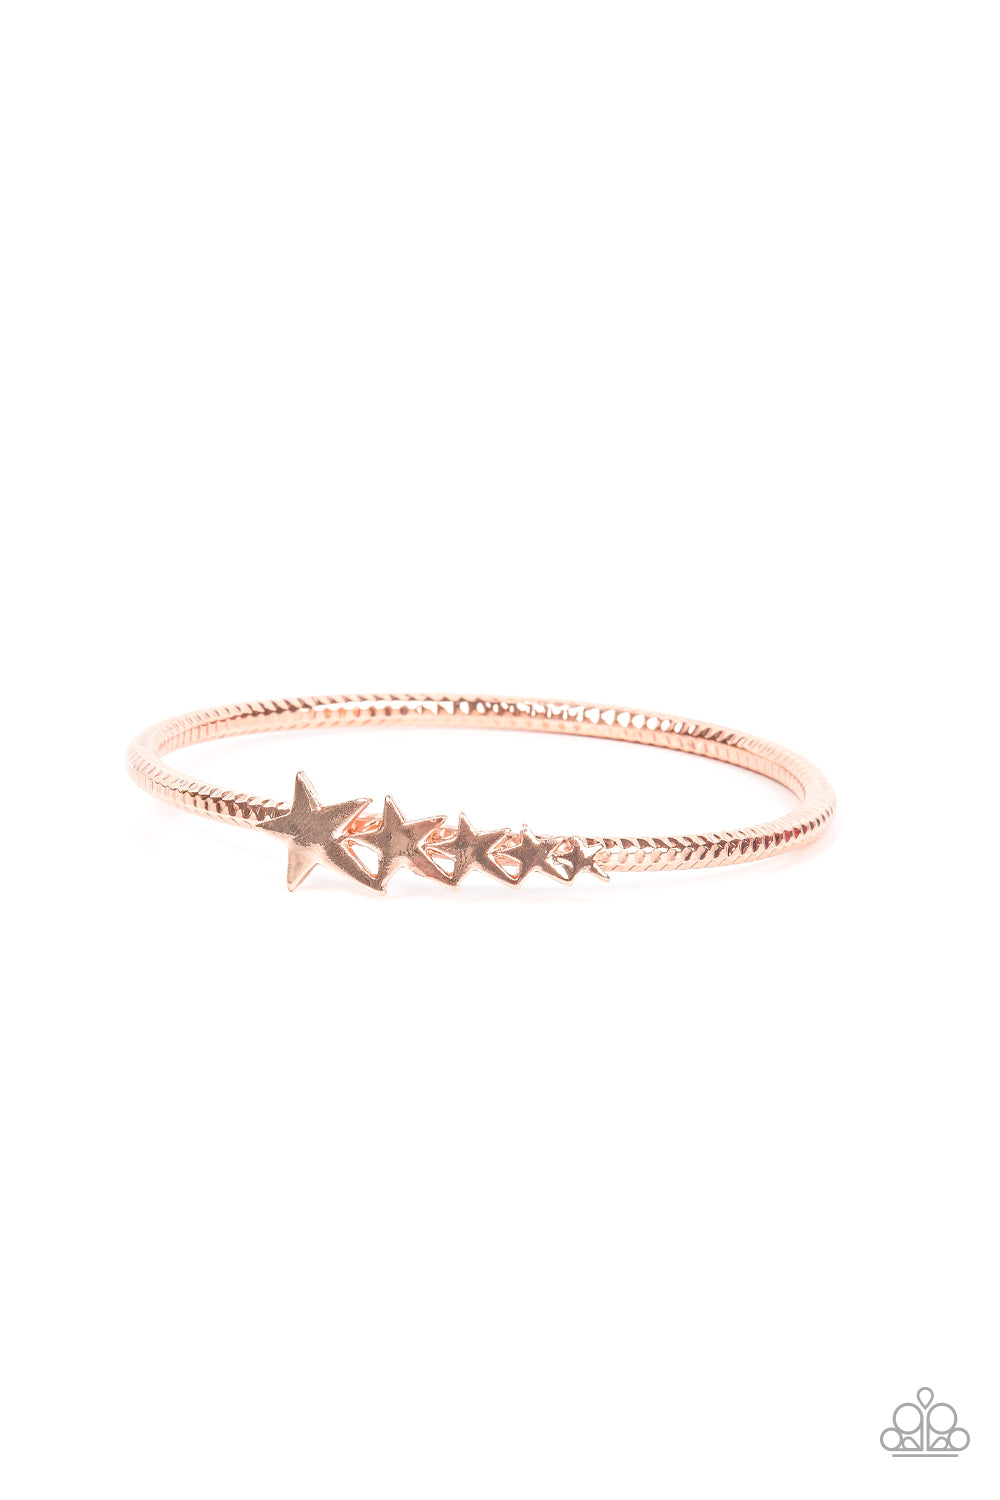 Paparazzi Accessories Astrological A-Lister - Copper